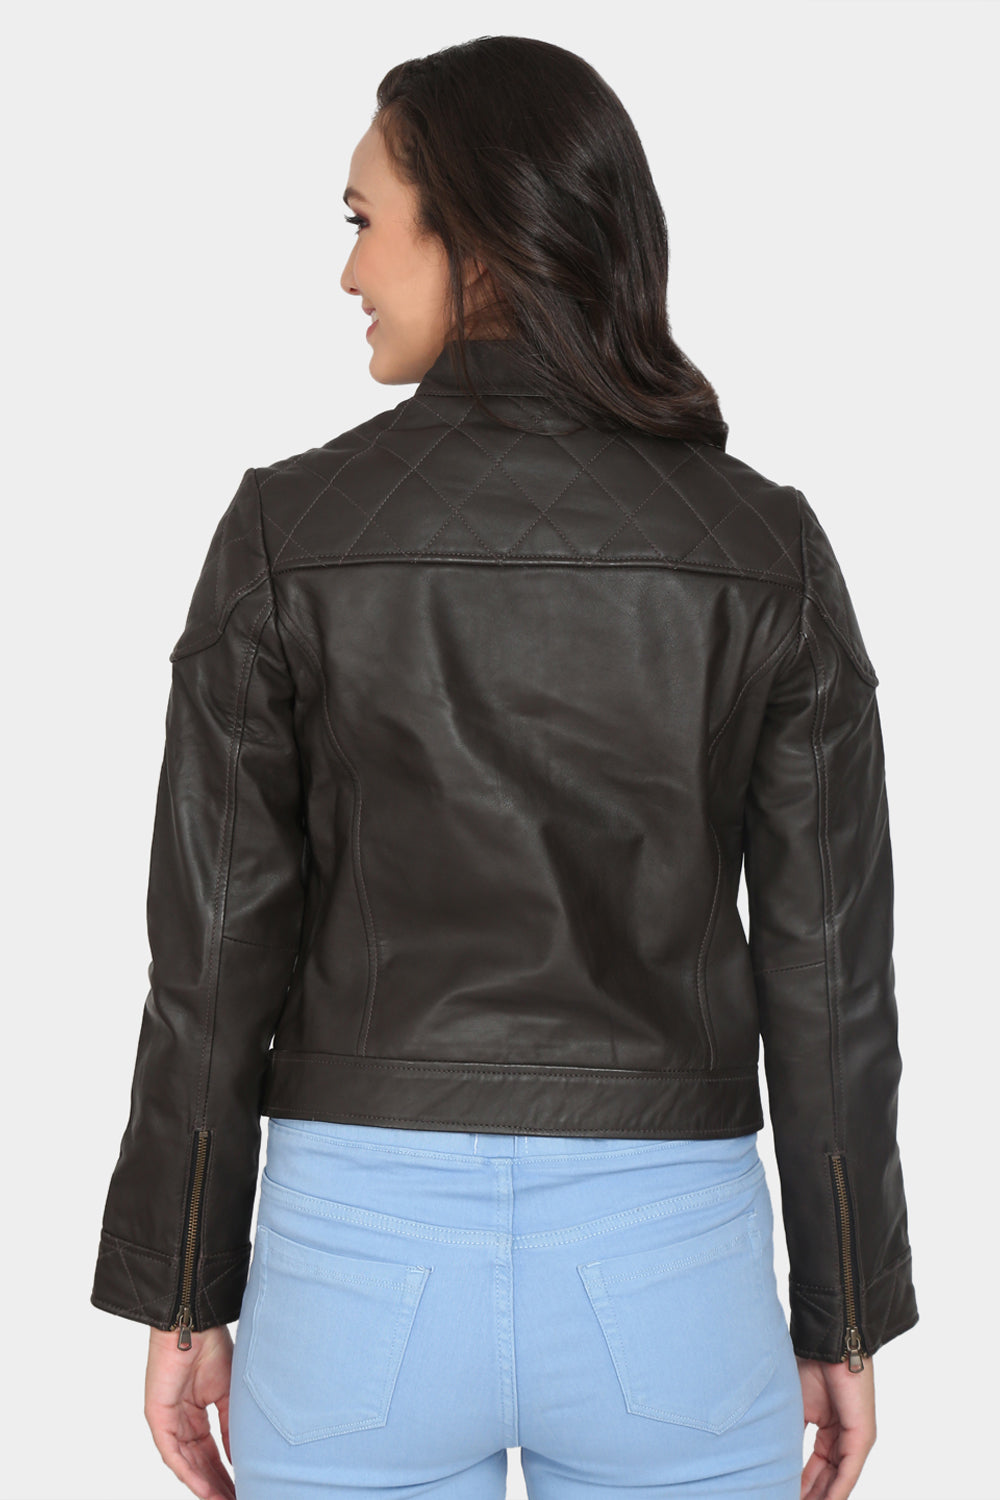 Justanned Umber Brown Leather Jacket